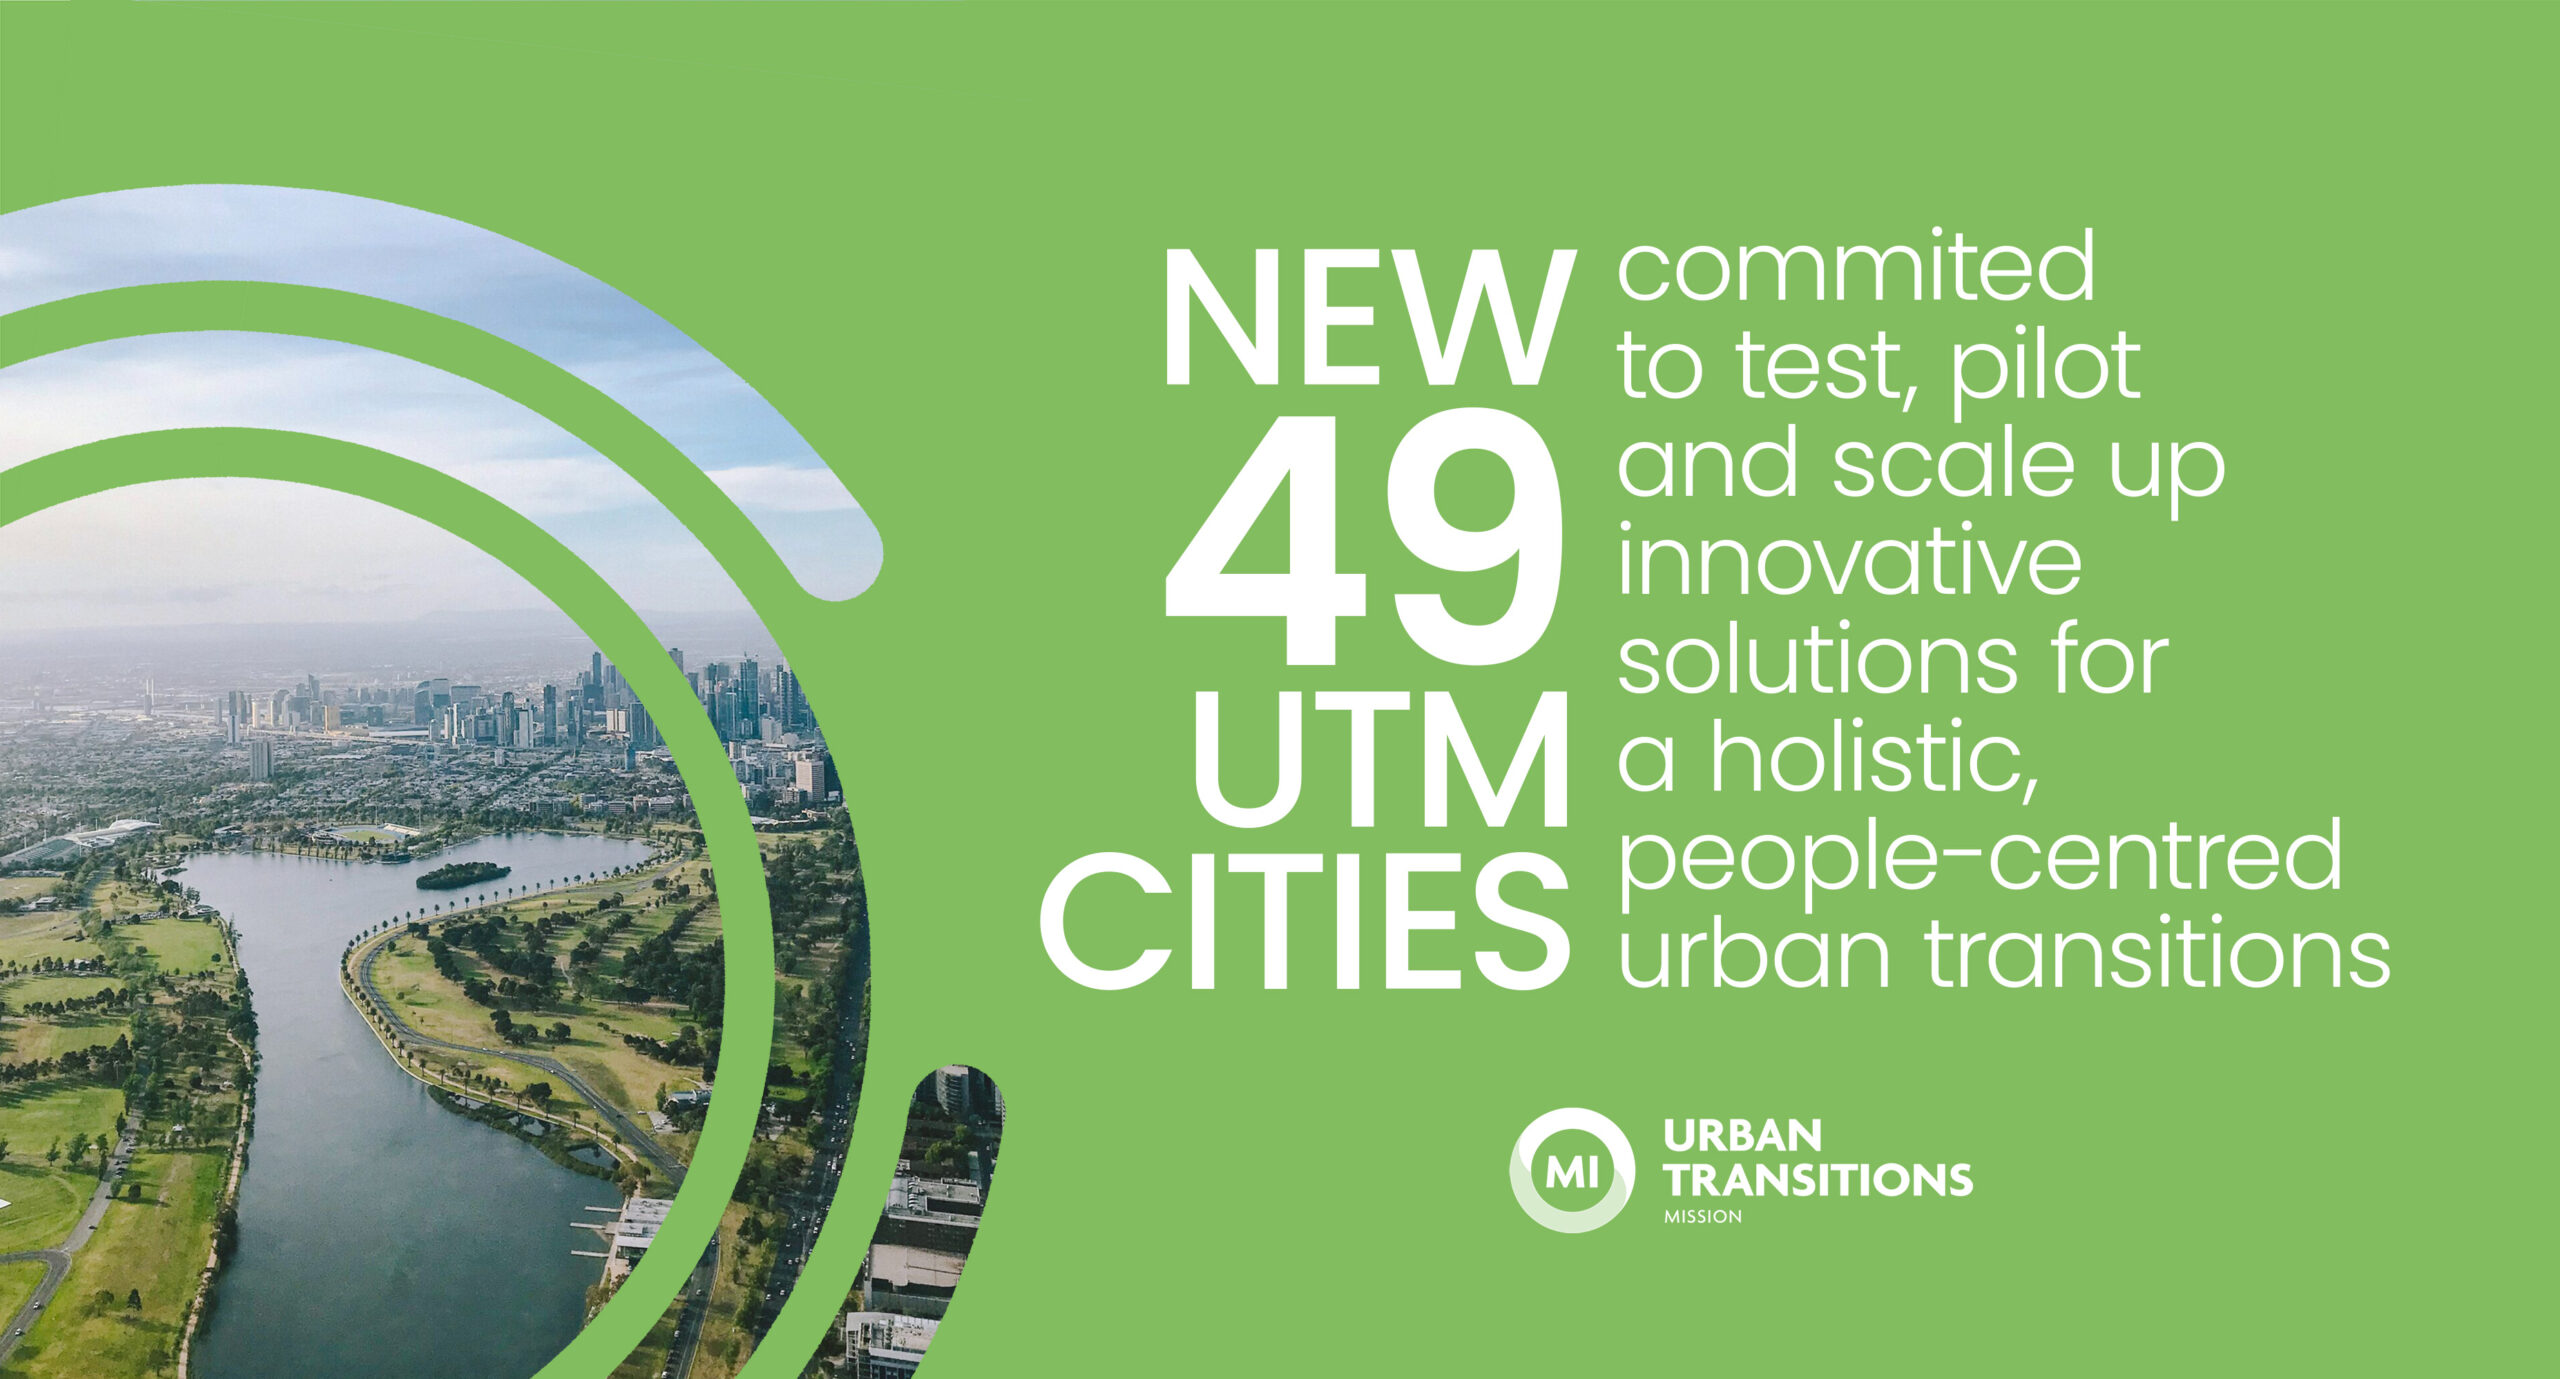 Urban Transitions Mission doubles the city cohort and welcomes new Cities to embark on a resilient pathway towards net-zero futures